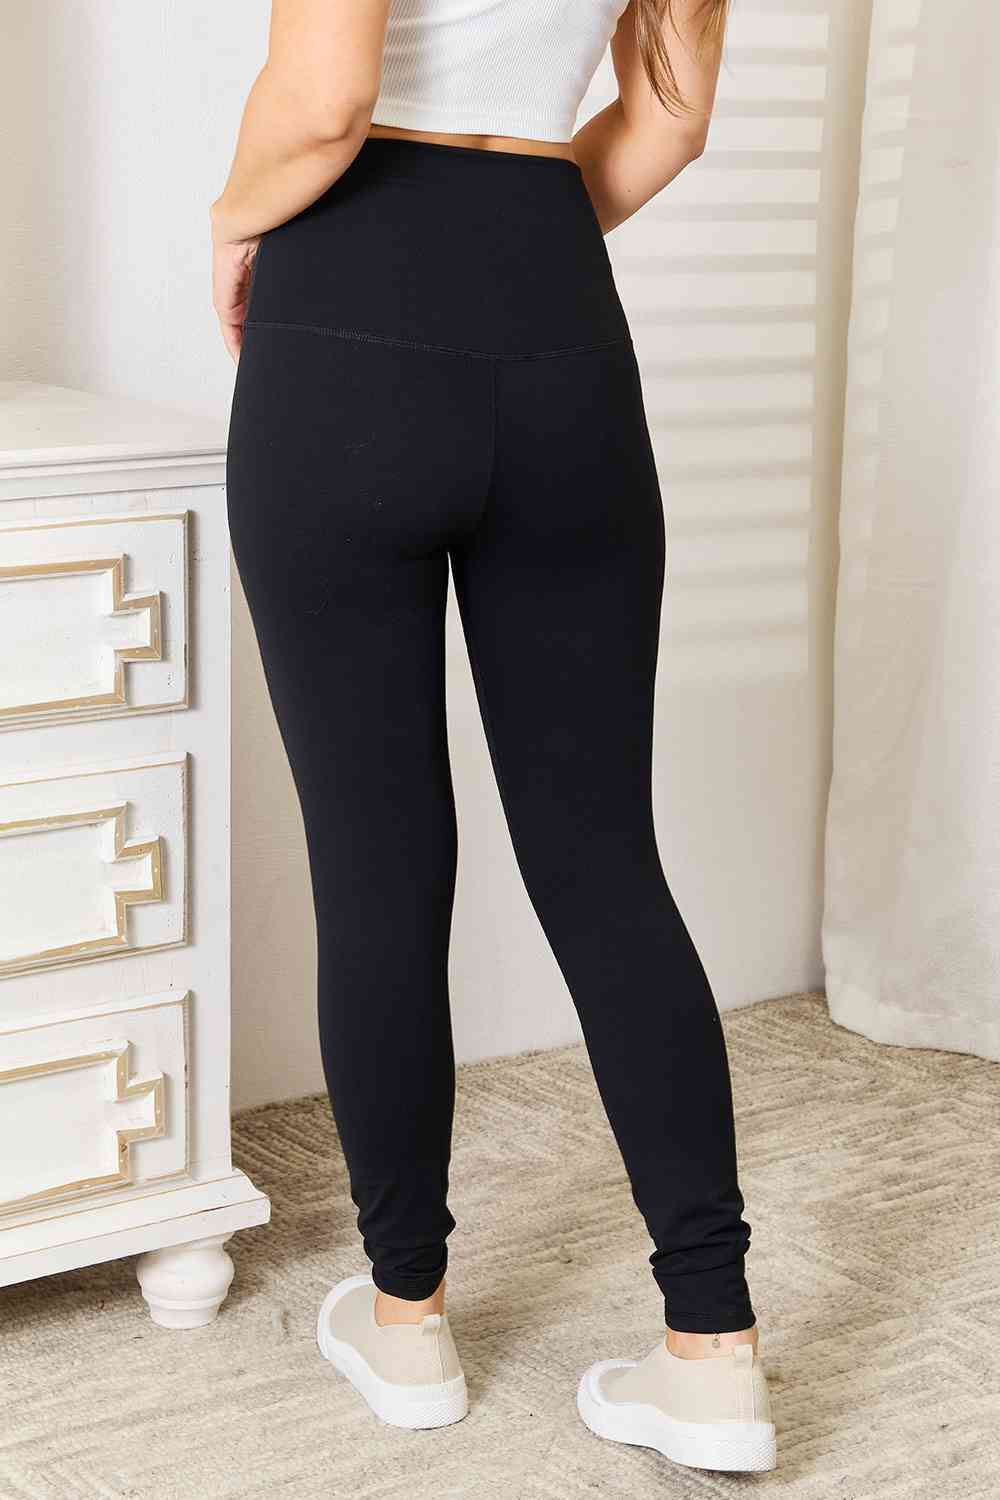 Ultra Soft High Waist Sports Leggings - All Products - Activewear - 2 - 2024